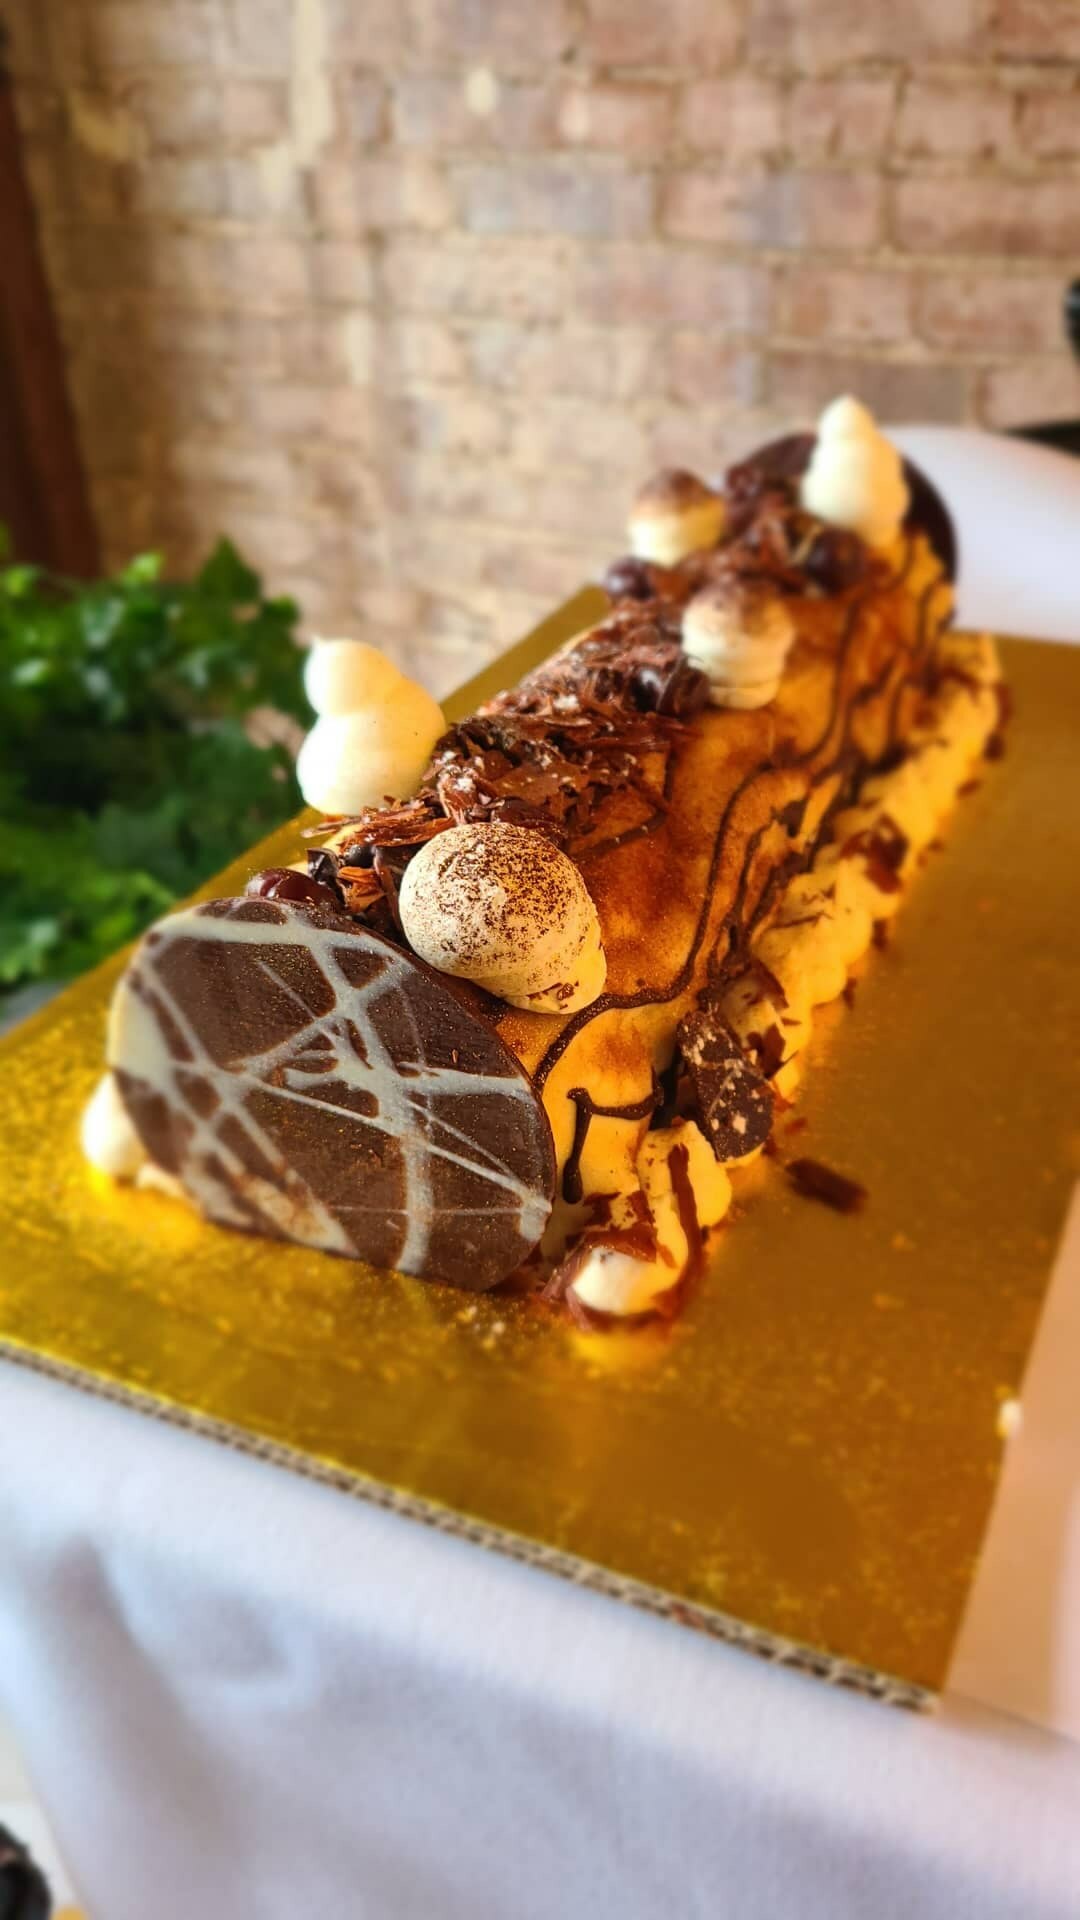 Lulu Kitchen & Bar's house-made Bûche de Noël cake is available for the holiday. CARL TIMPONE